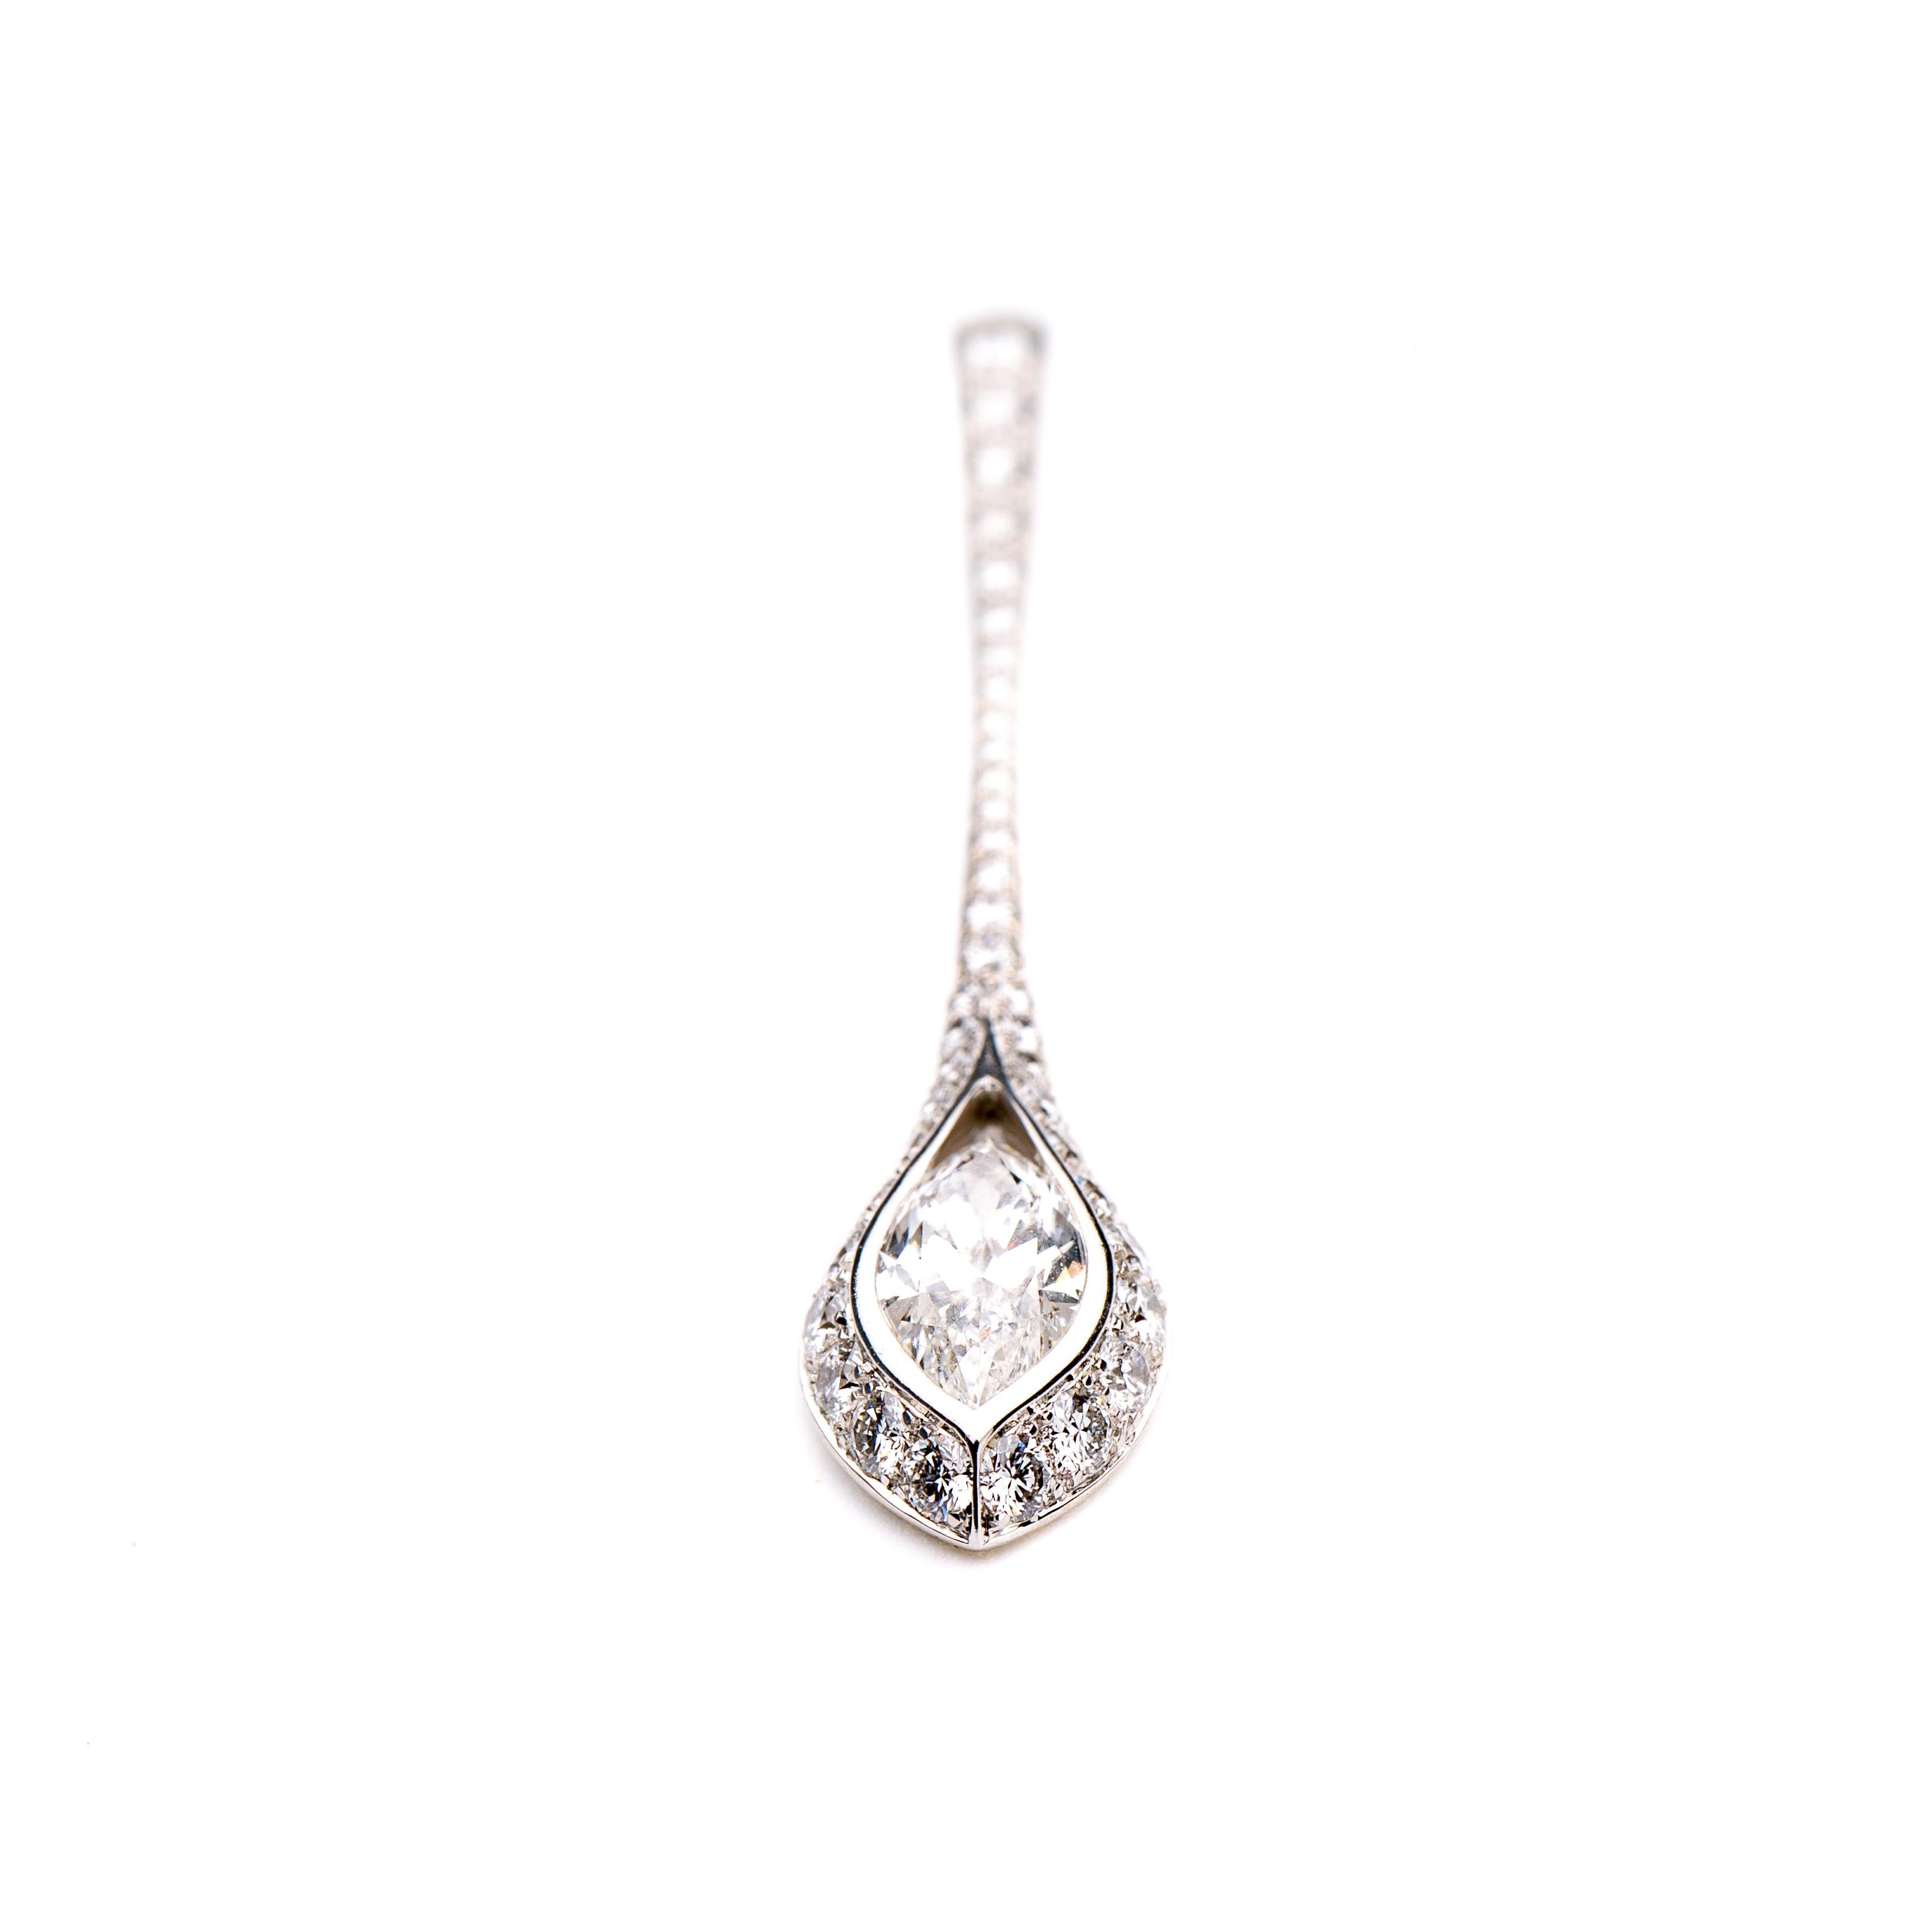 The Royals Is Inspired By Drops Of Light, Dew And Precious Stones, And Like A Vine Of Blossoming Gemstones It Frames The Beauty Of Women. Celebrating A 0.43 carat Marquise Diamond, This Ring Pendant Gives All Its Meaning To The Word 